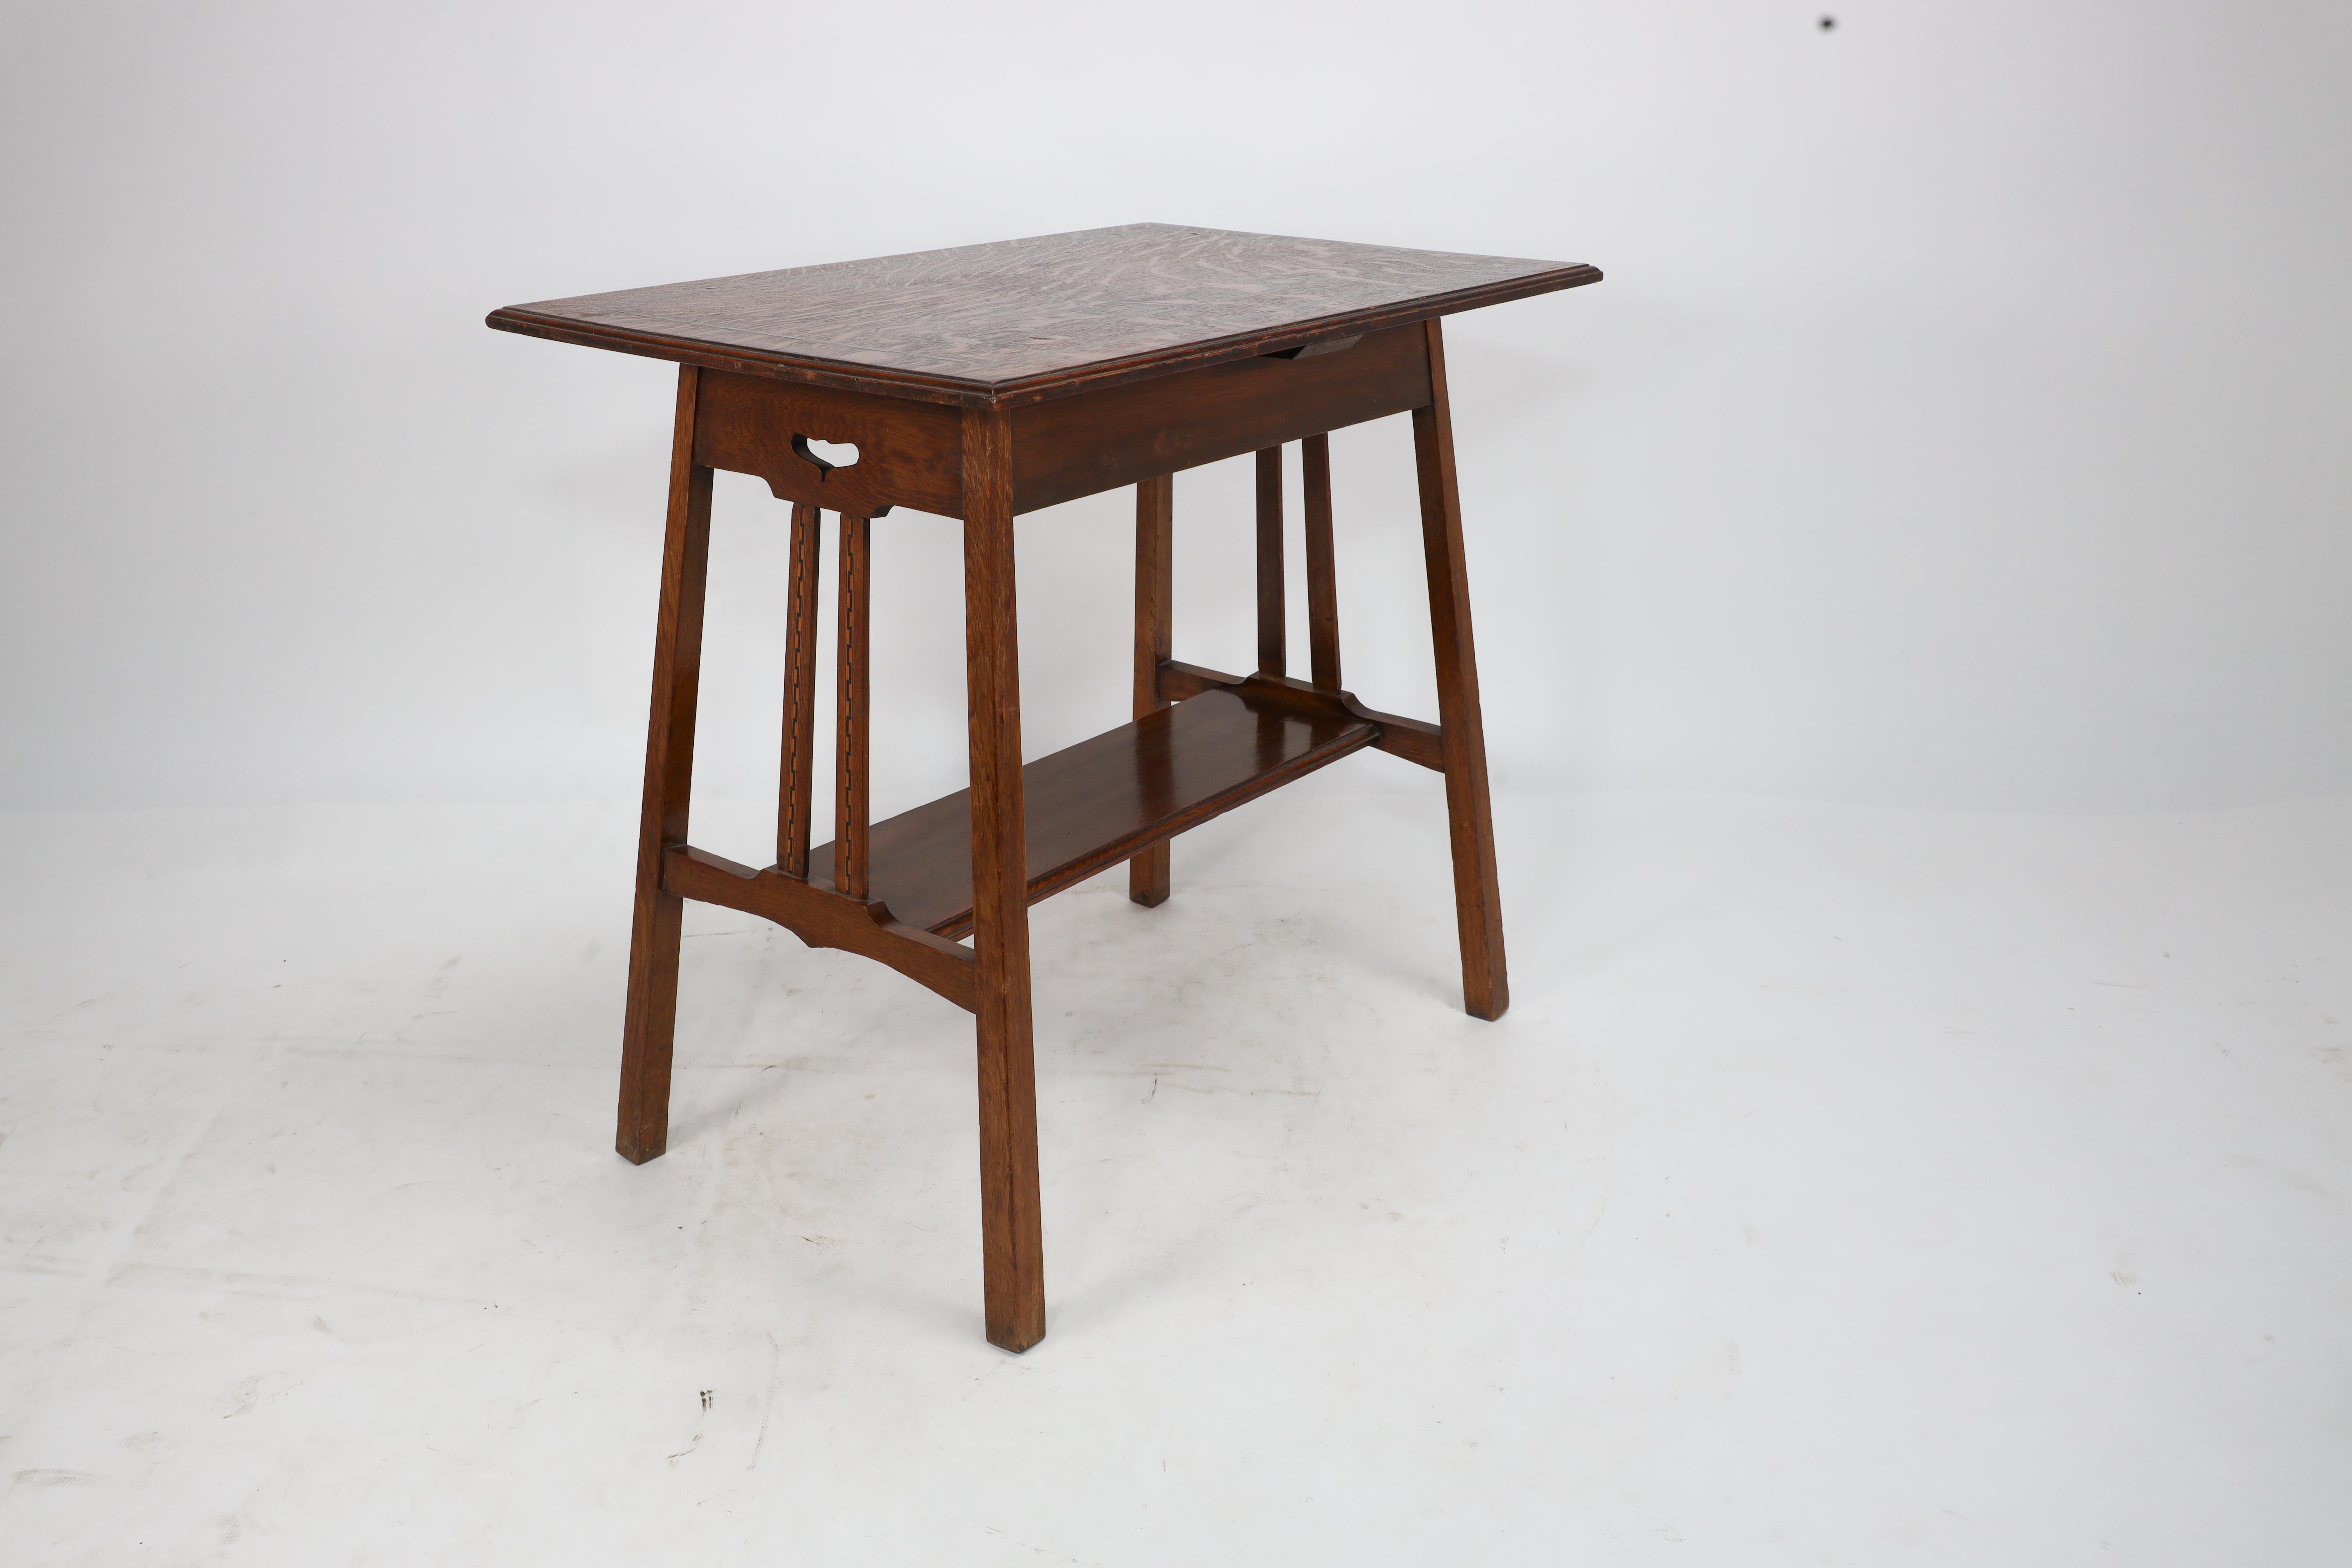 Oak Arts & Crafts side table with oblong chequered inlaid top & curved aprons below. For Sale